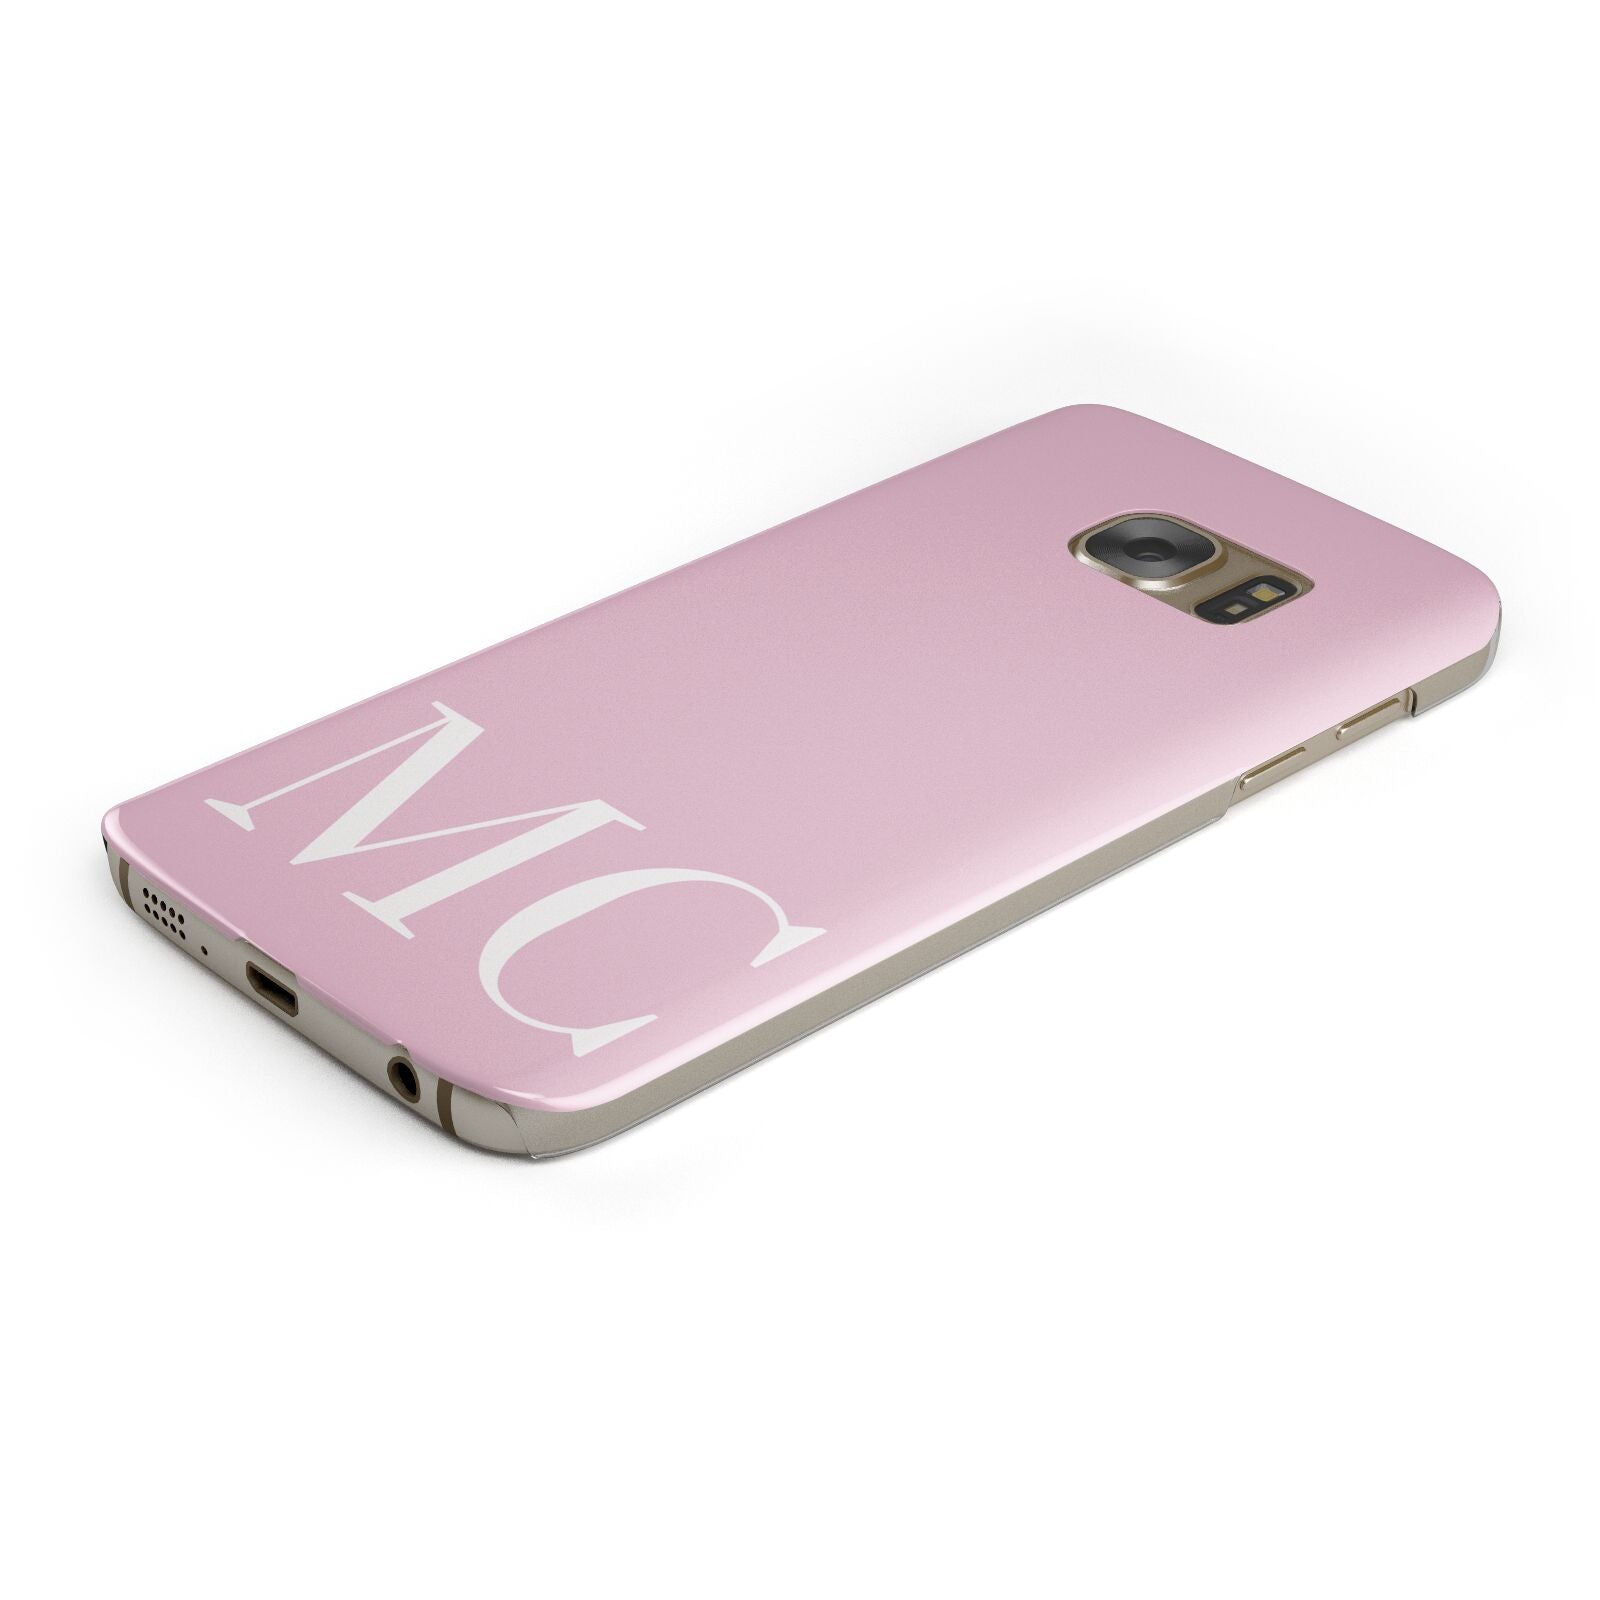 Initials Personalised 2 Protective Samsung Galaxy Case Angled Image